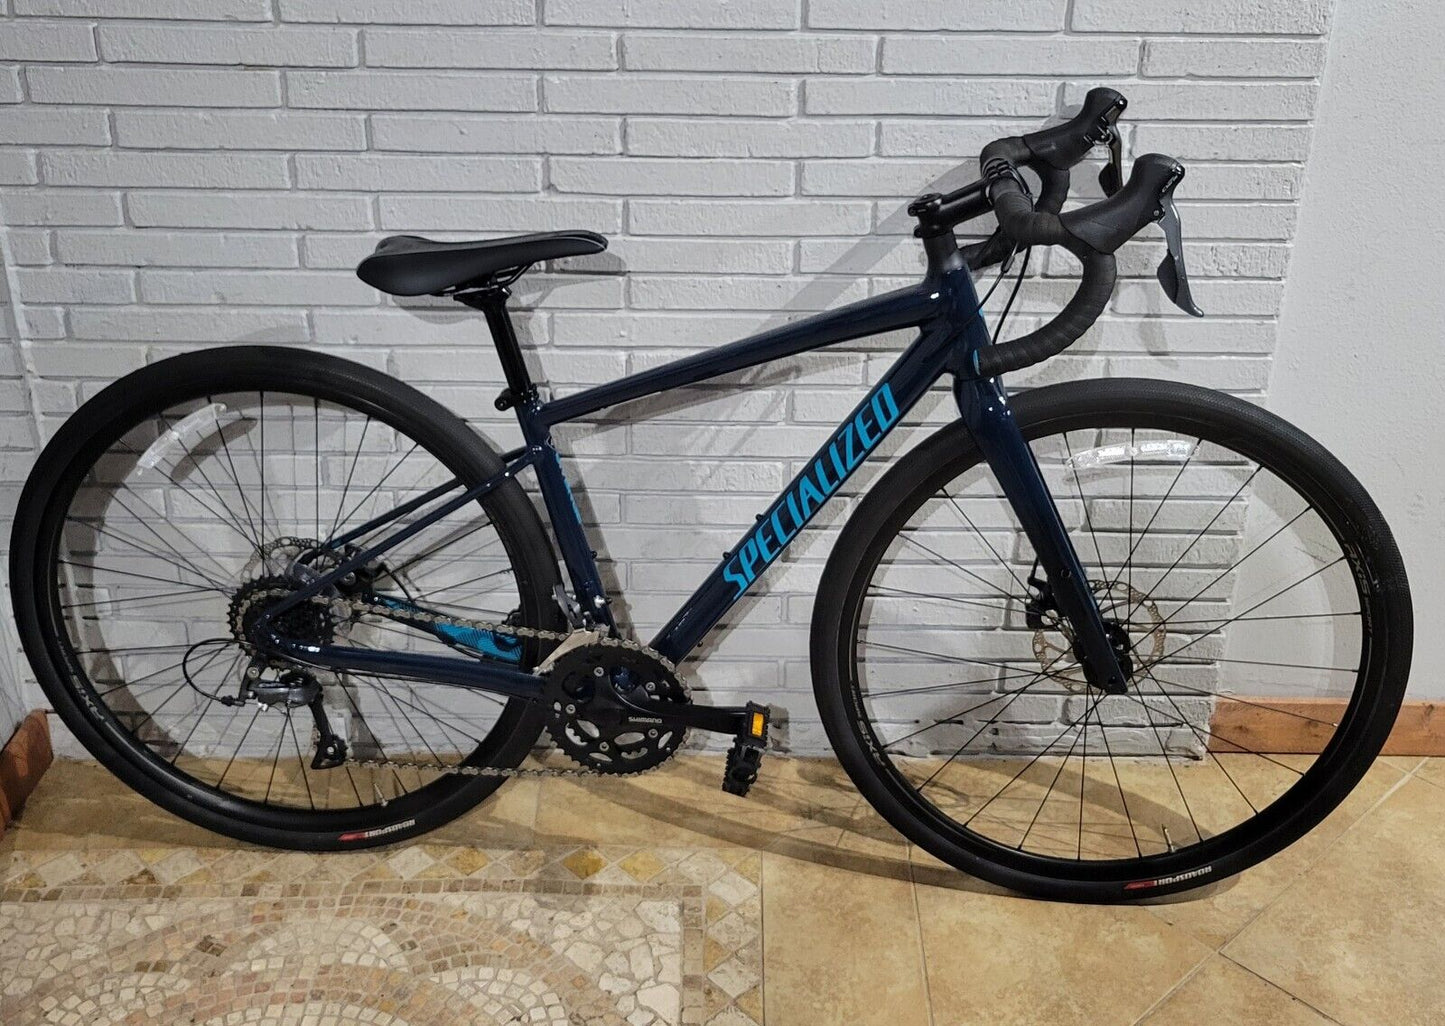 2020 Specialized Diverge e5 (Size 48cm Extra Small)